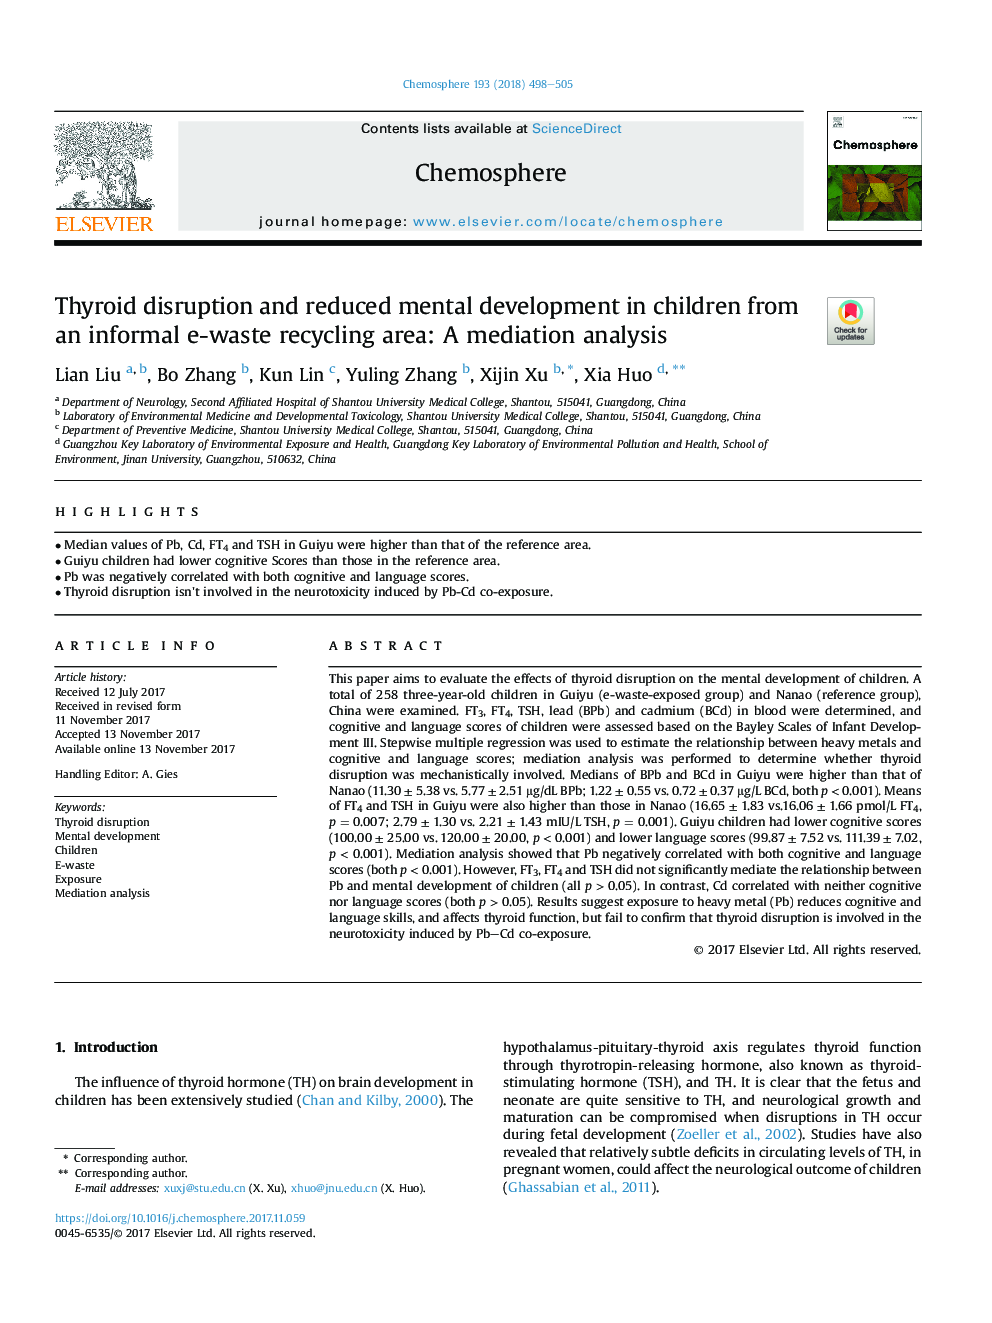 Thyroid disruption and reduced mental development in children from an informal e-waste recycling area: A mediation analysis